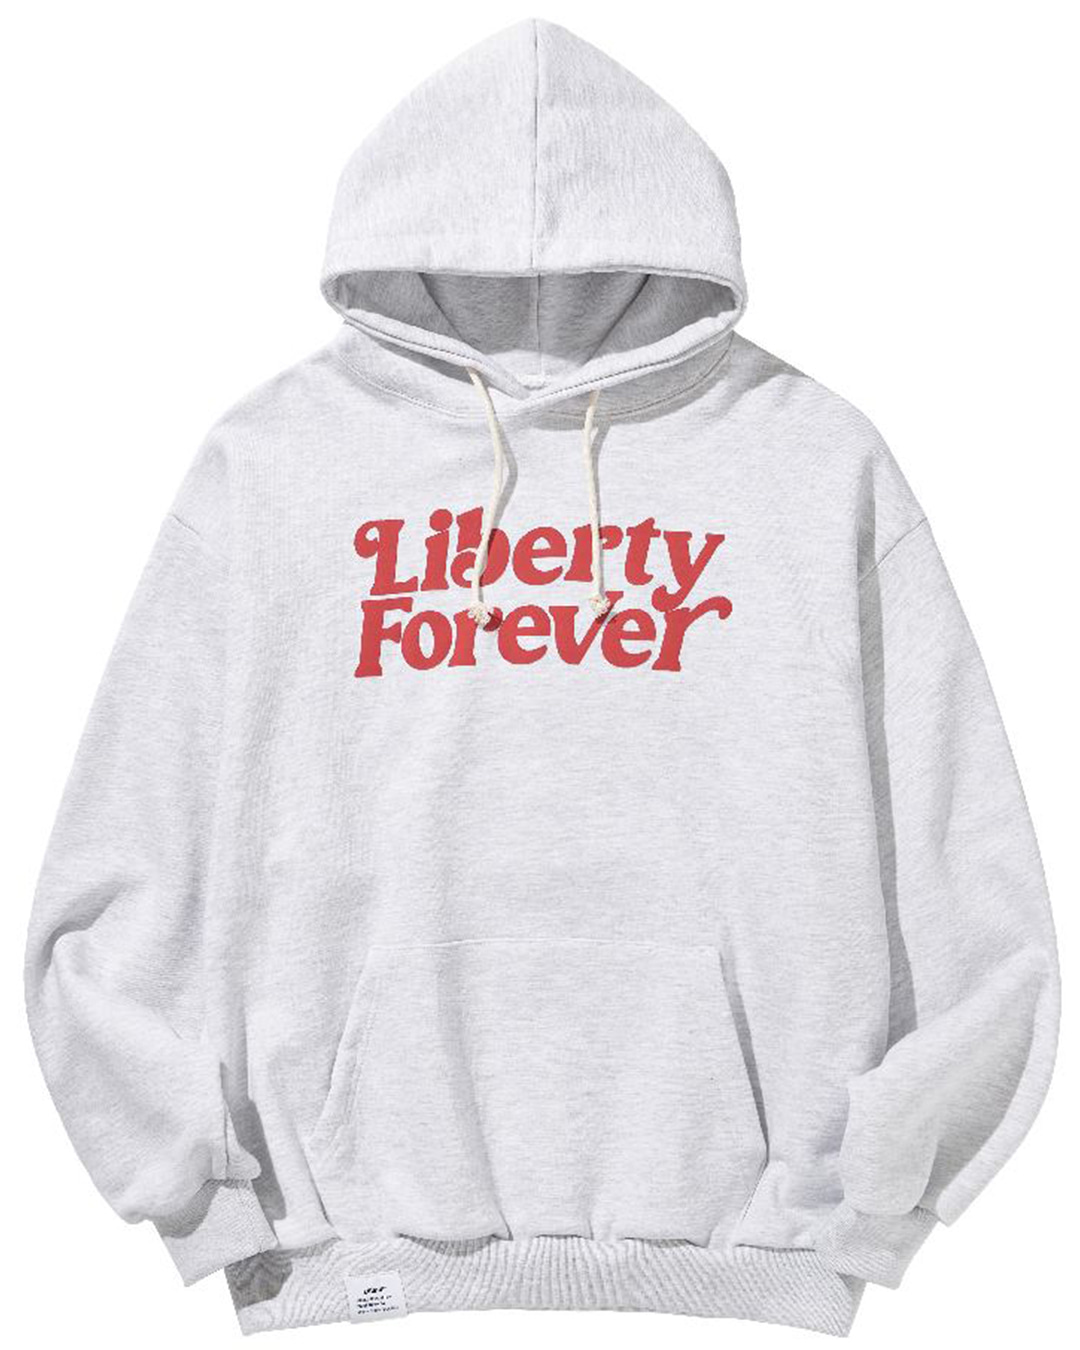 FOREVER HOODIE / GRAY,BTS,JAPAN,FASHIONBRAND,LIBERE